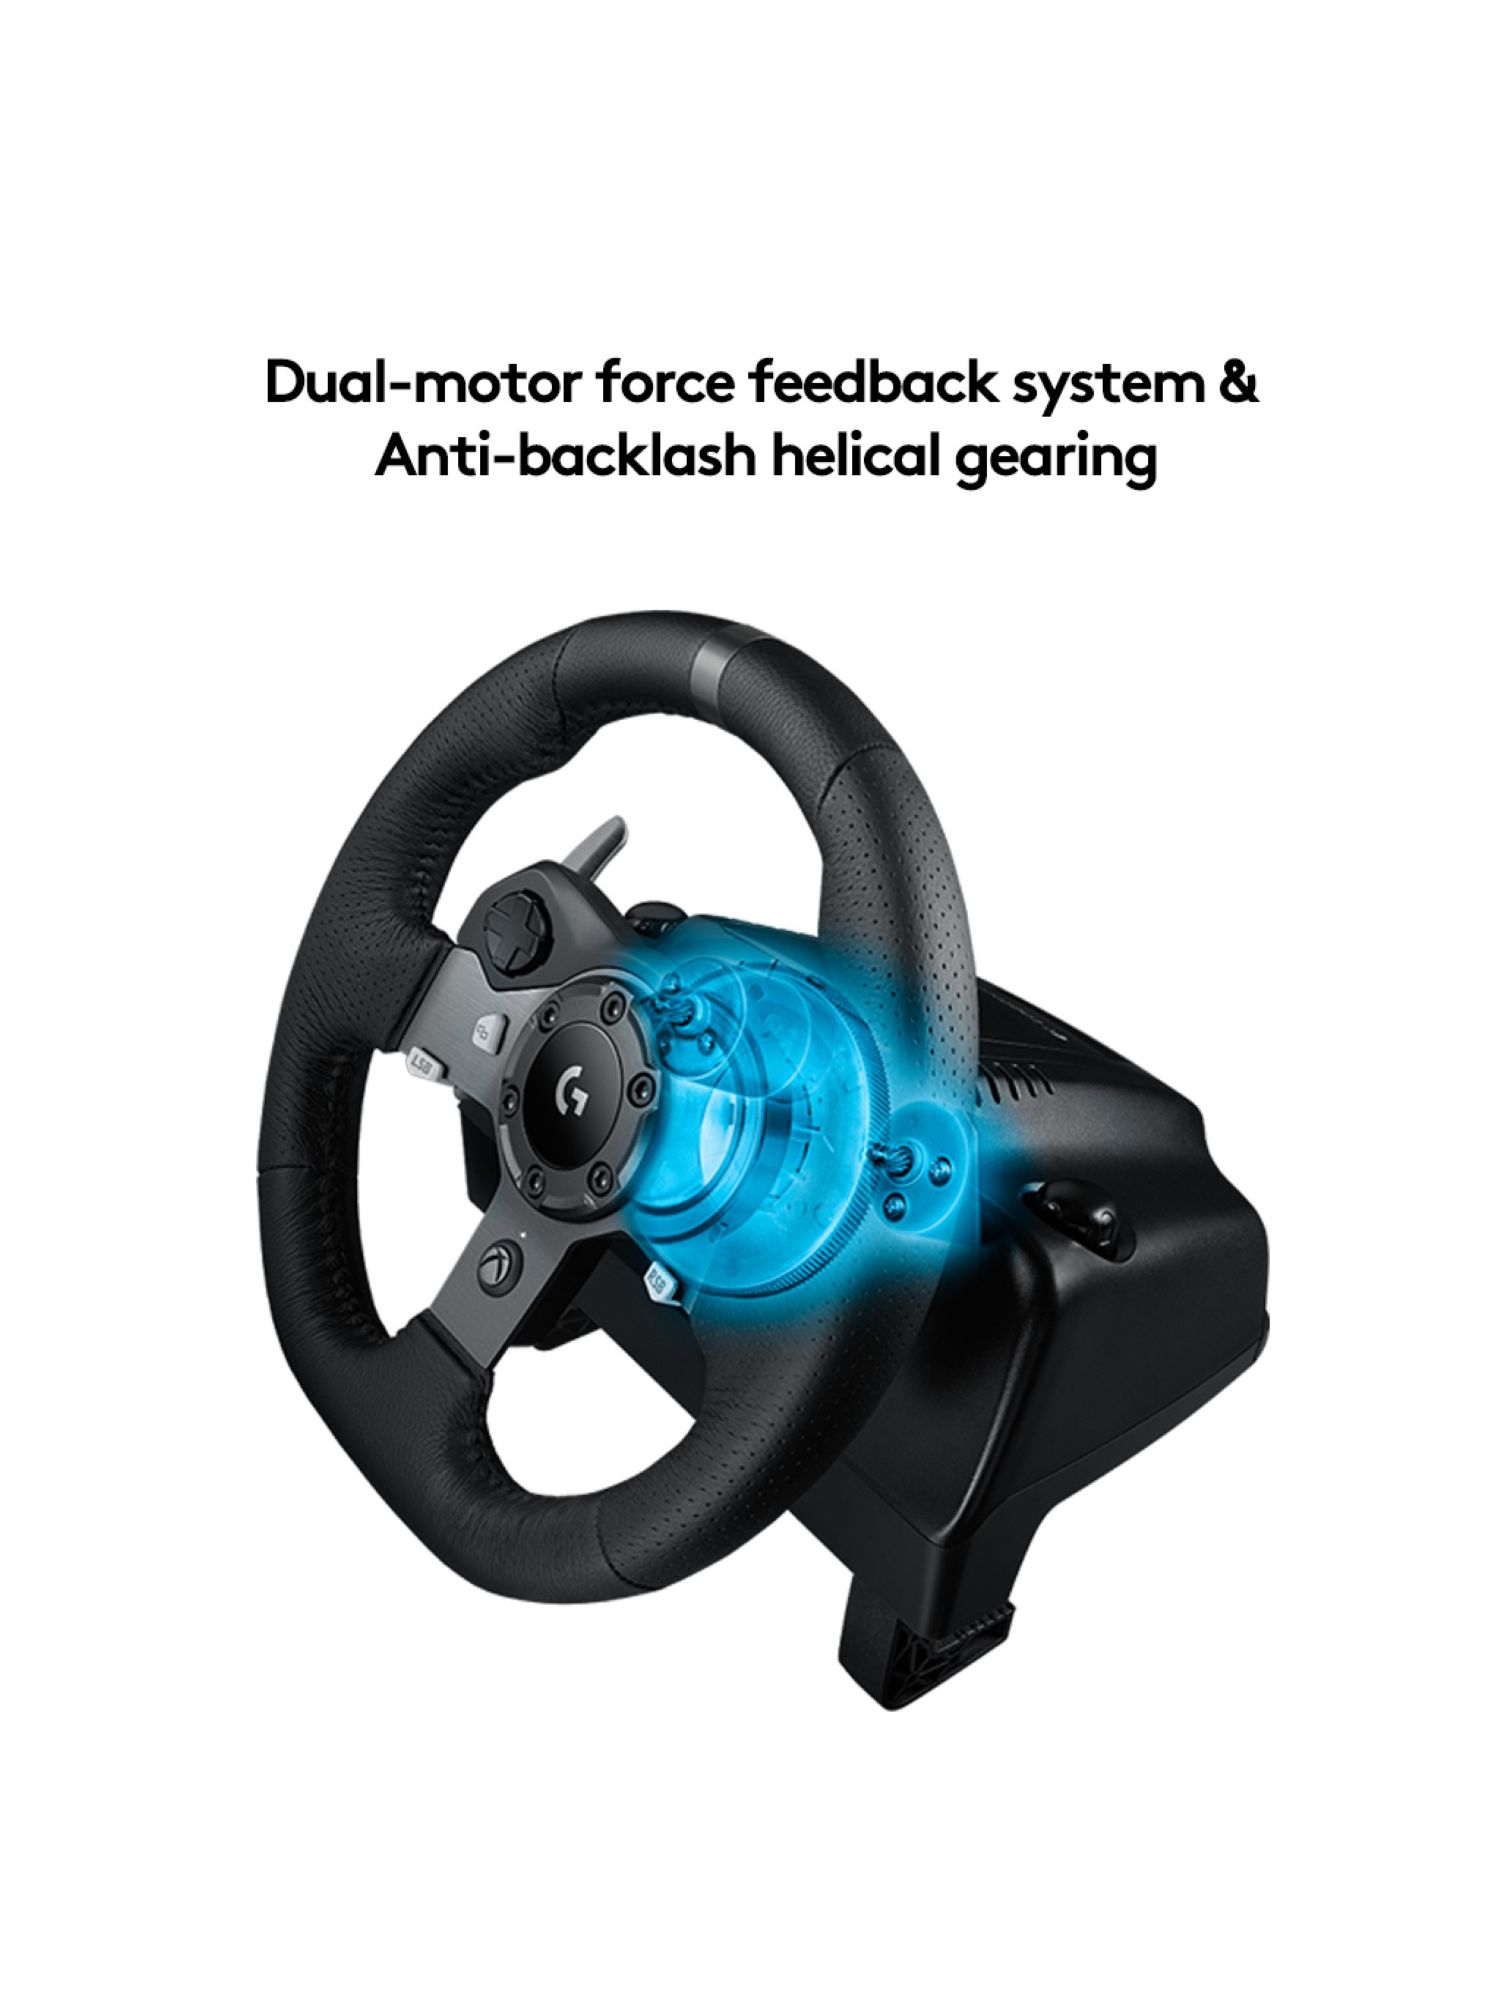 Logitech G920 Driving Force Racing Wheel for Xbox & PC